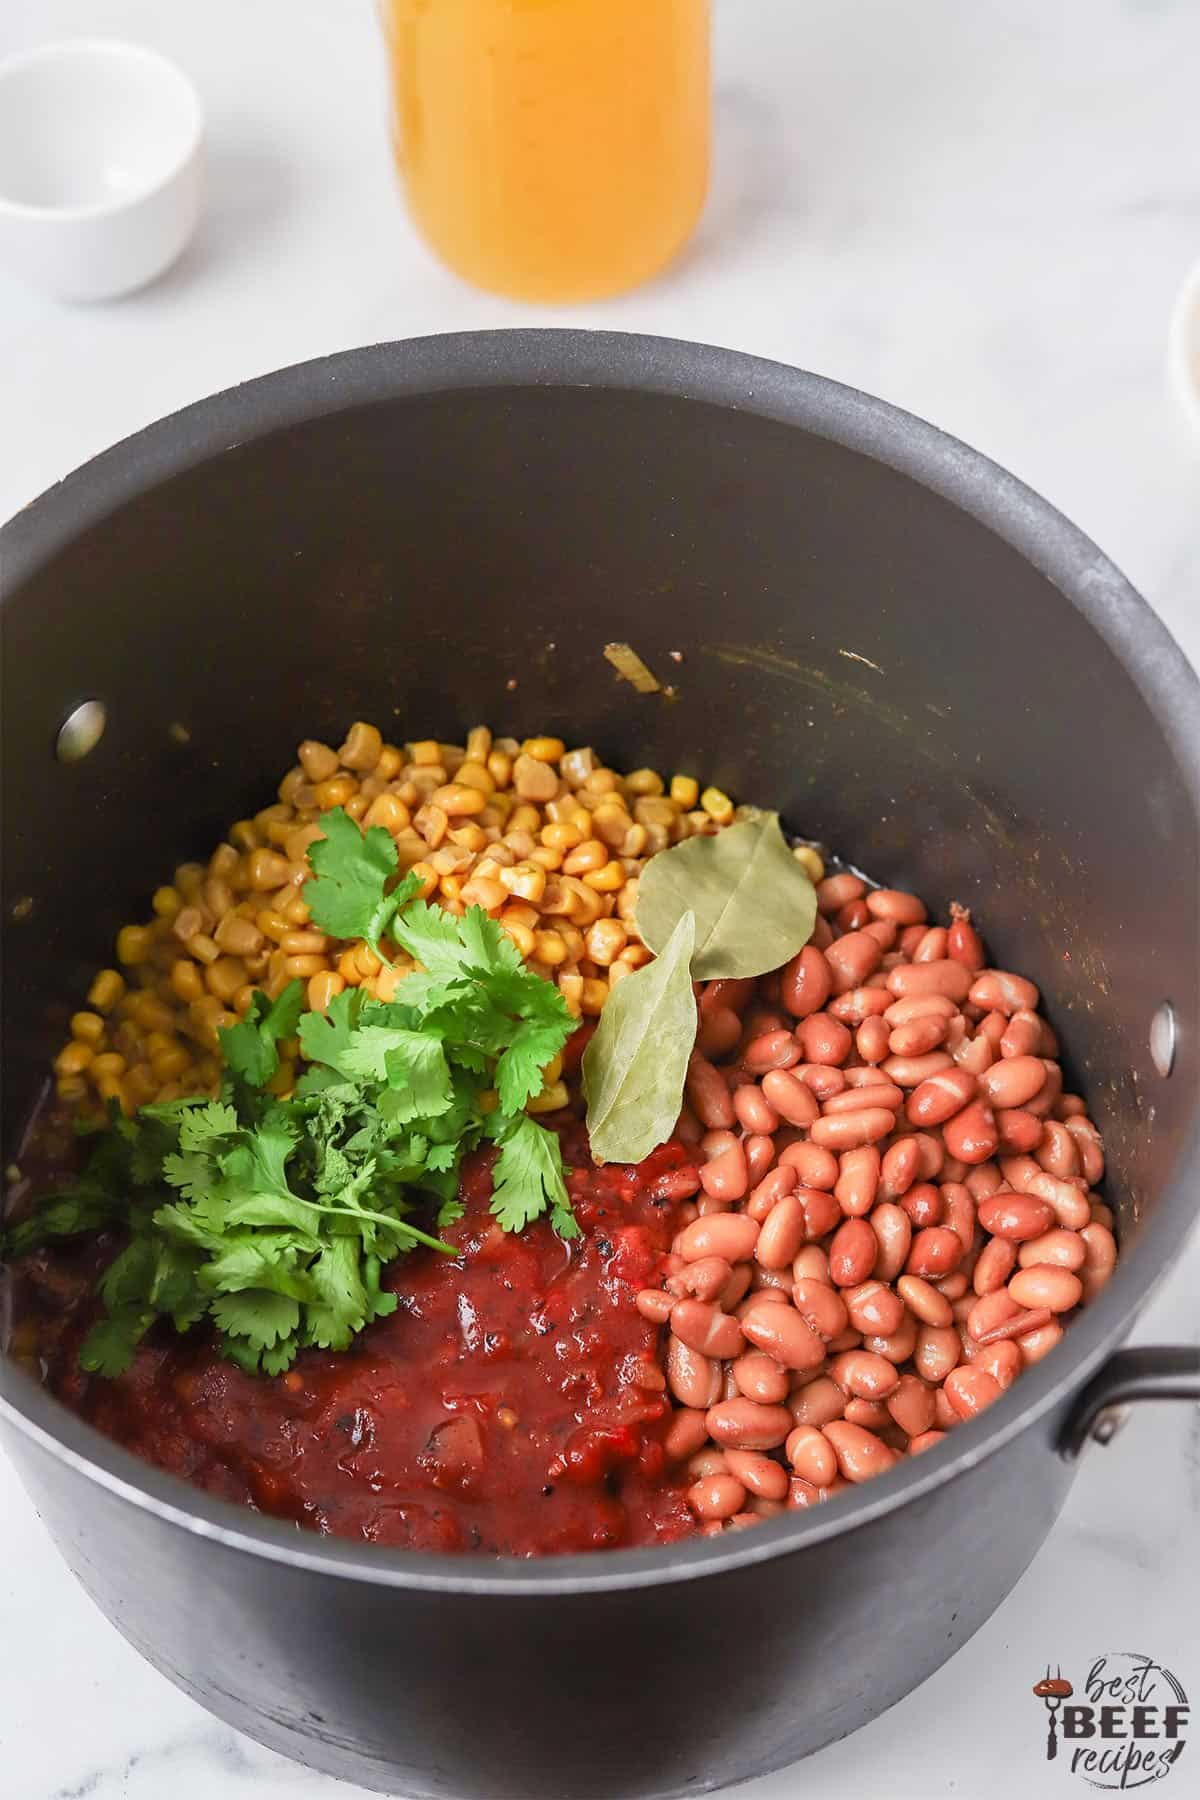 Adding beans, corn, and herbs